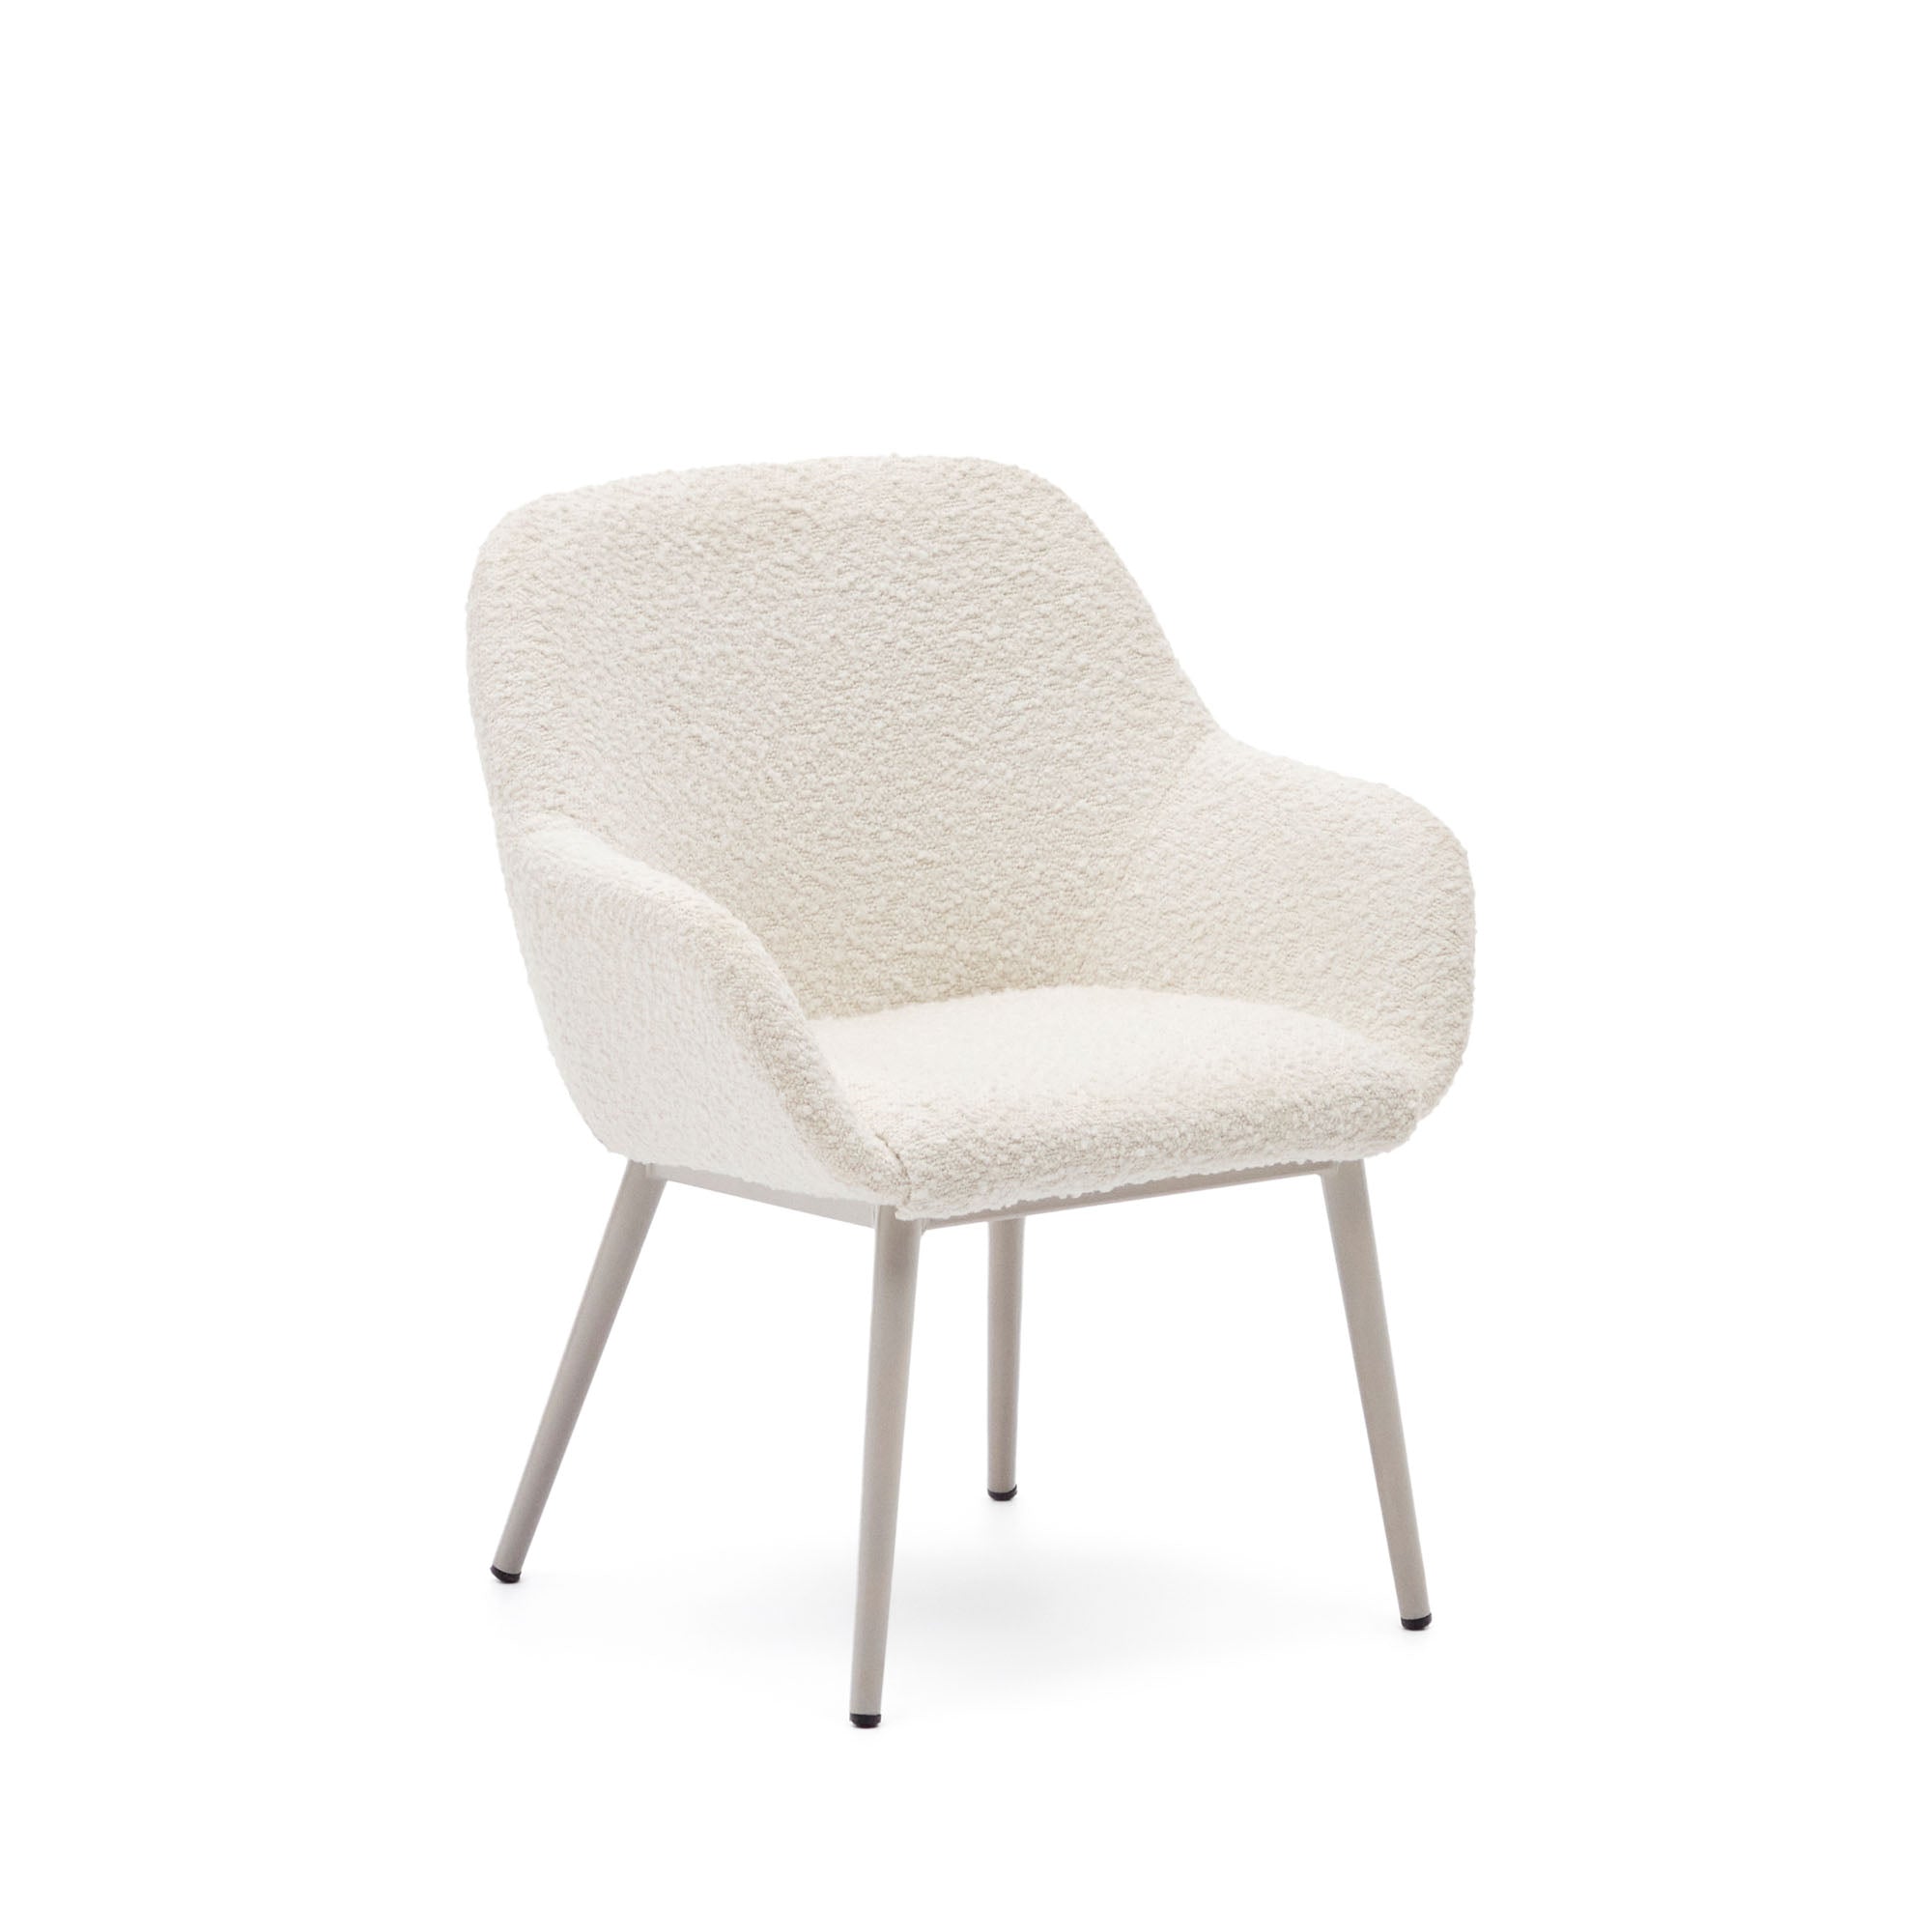 Konna children's chair in white shearling with steel legs and a beige finish